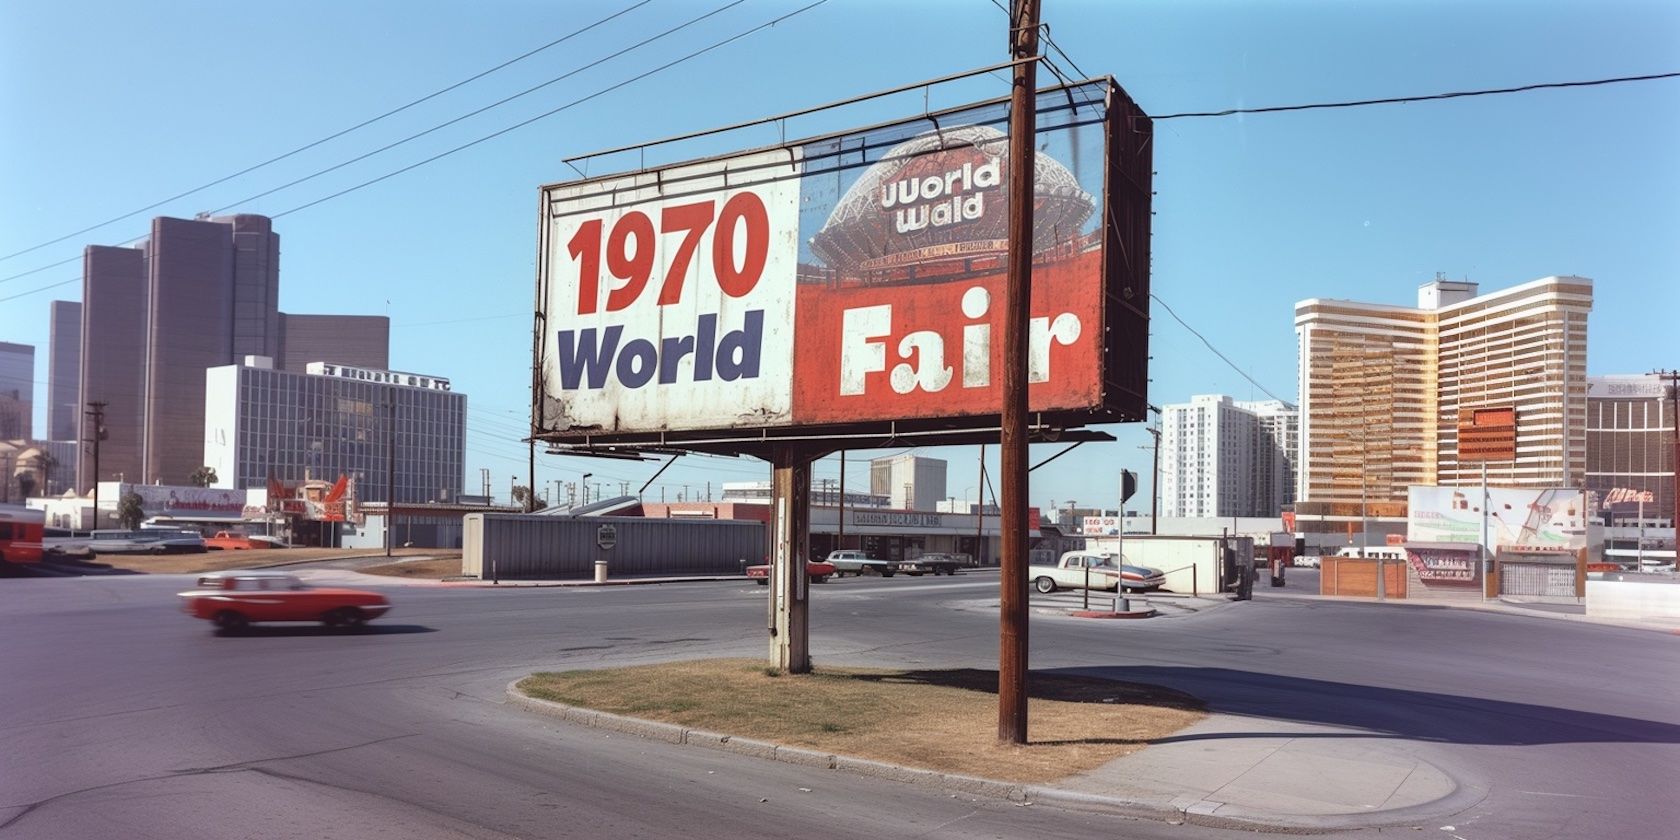 Midjourney image of a billboard painted with 1970 world fair